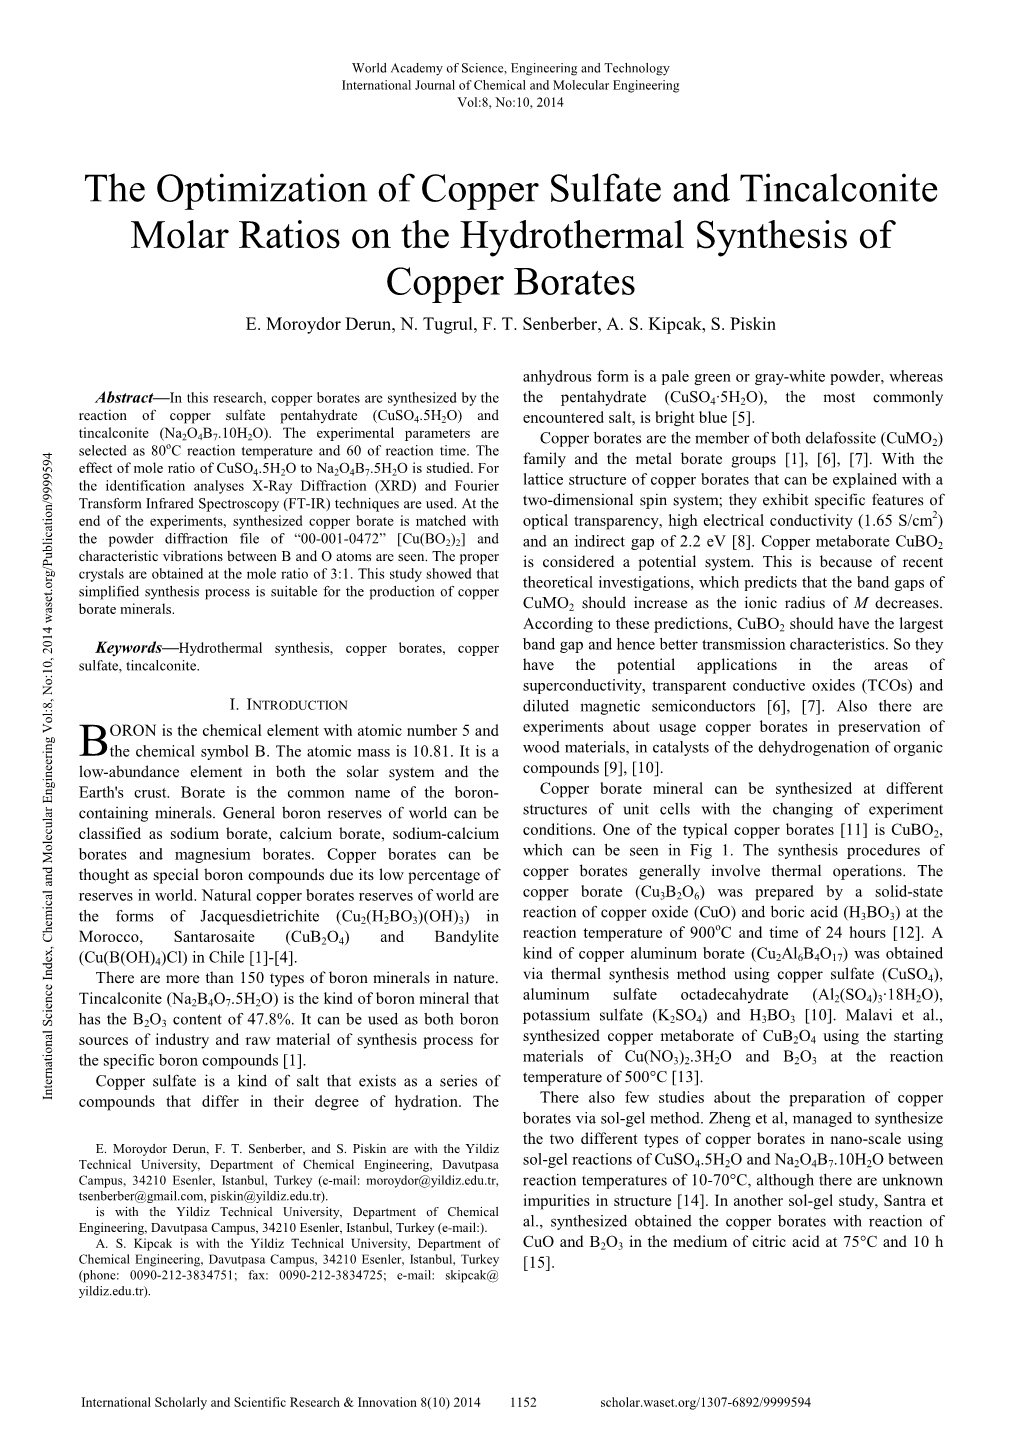 The Optimization of Copper Sulfate and Tincalconite Molar Ratios on the Hydrothermal Synthesis of Copper Borates E